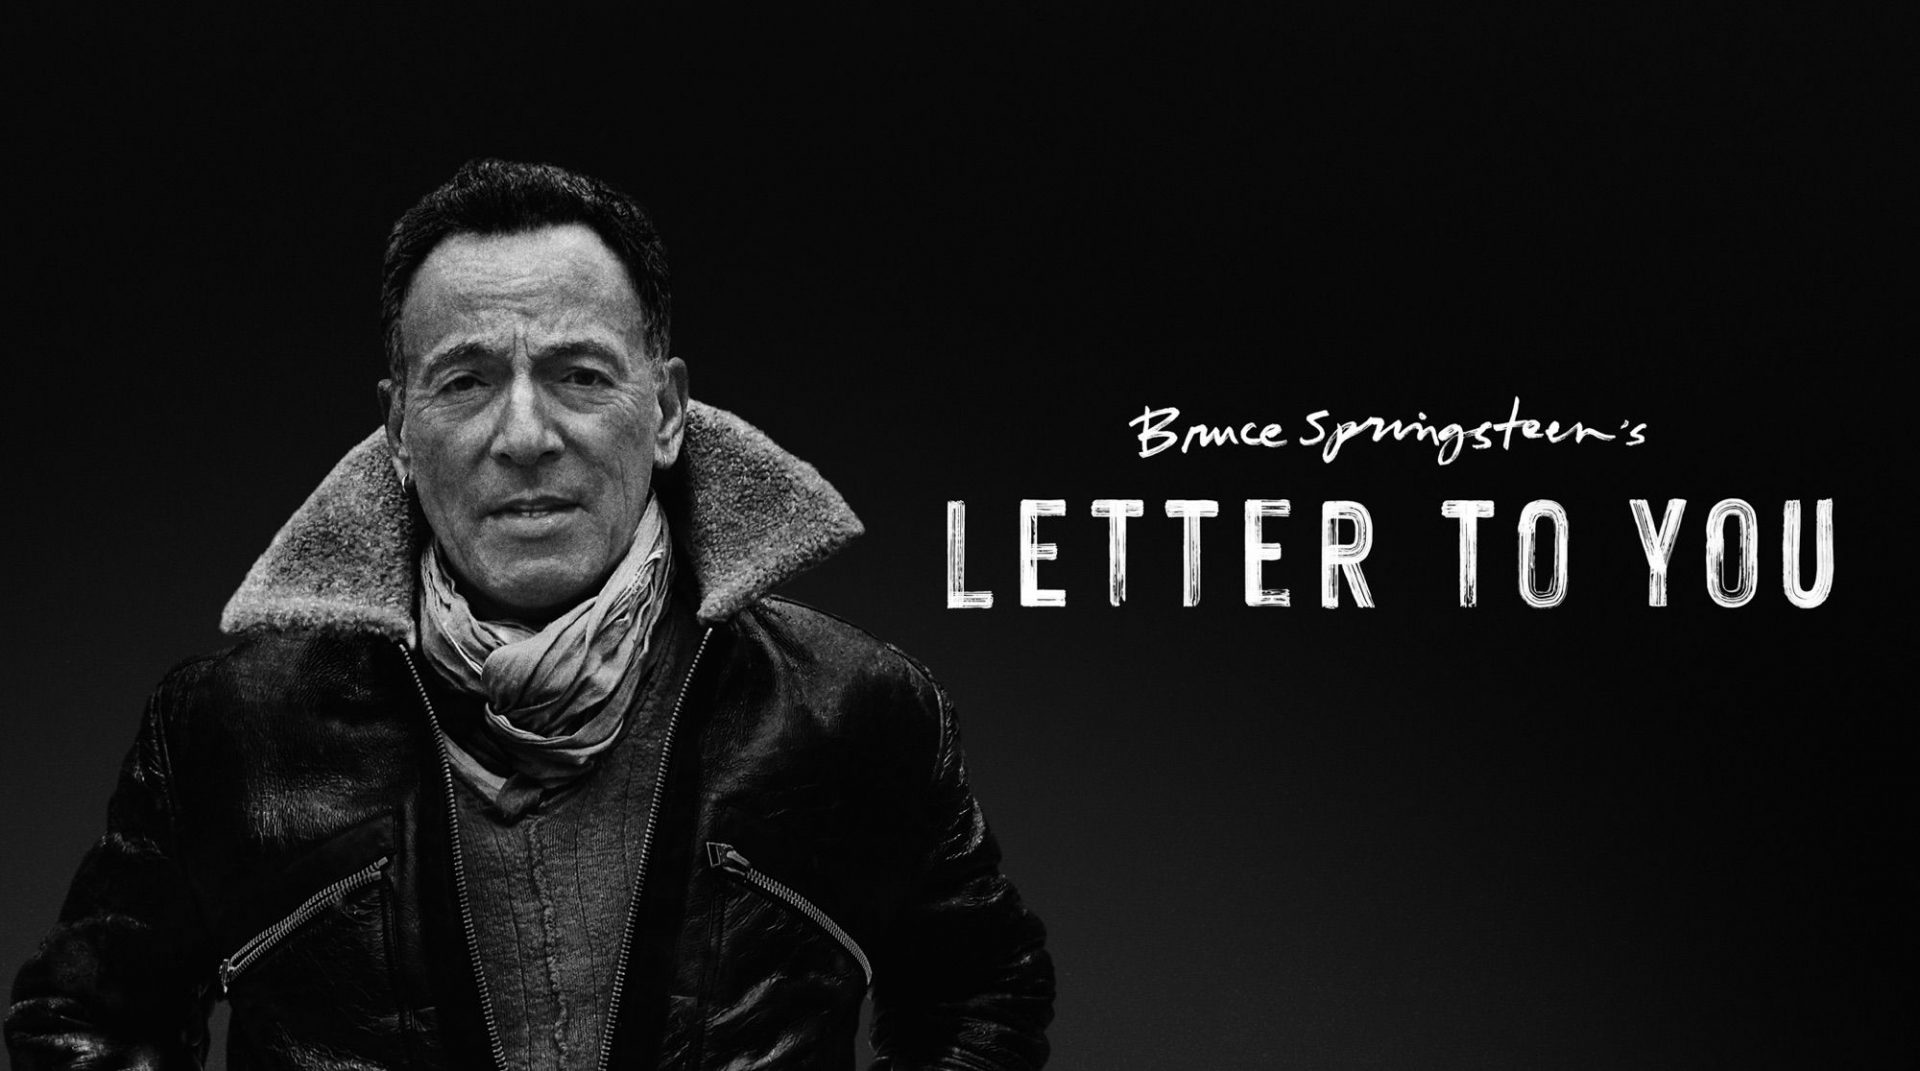 Bruce Springsteen’s Letter to You (film)